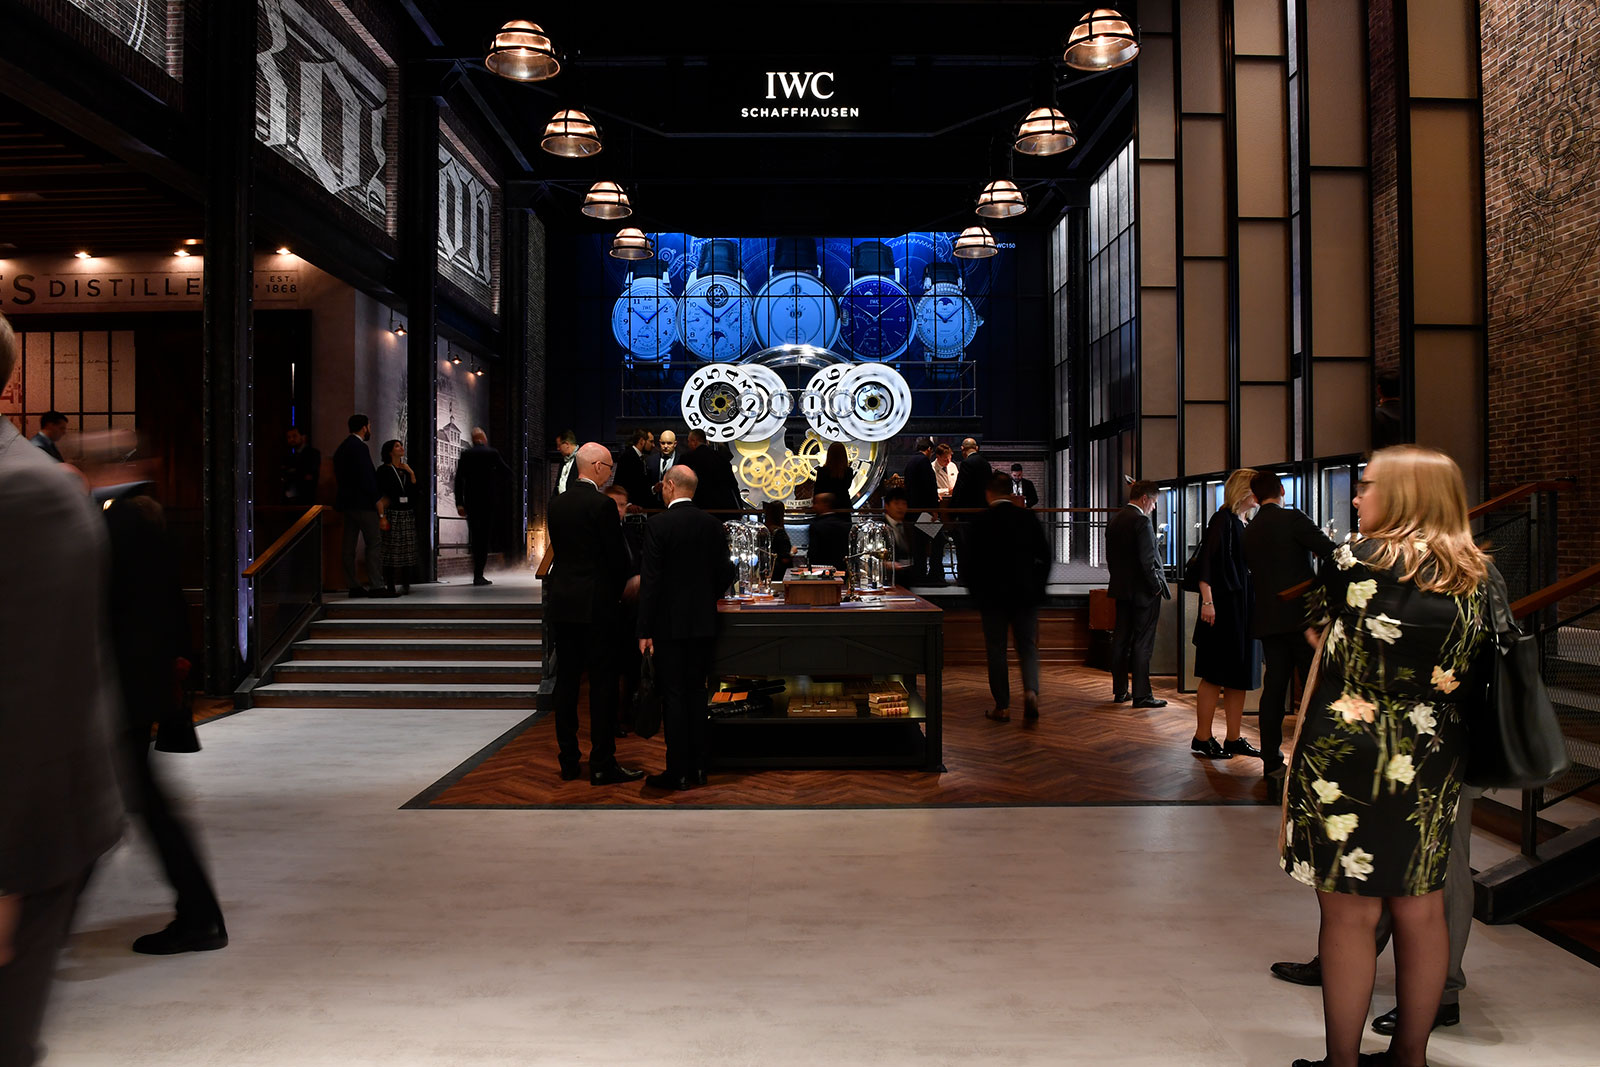 SIHH 2018 IWC booth